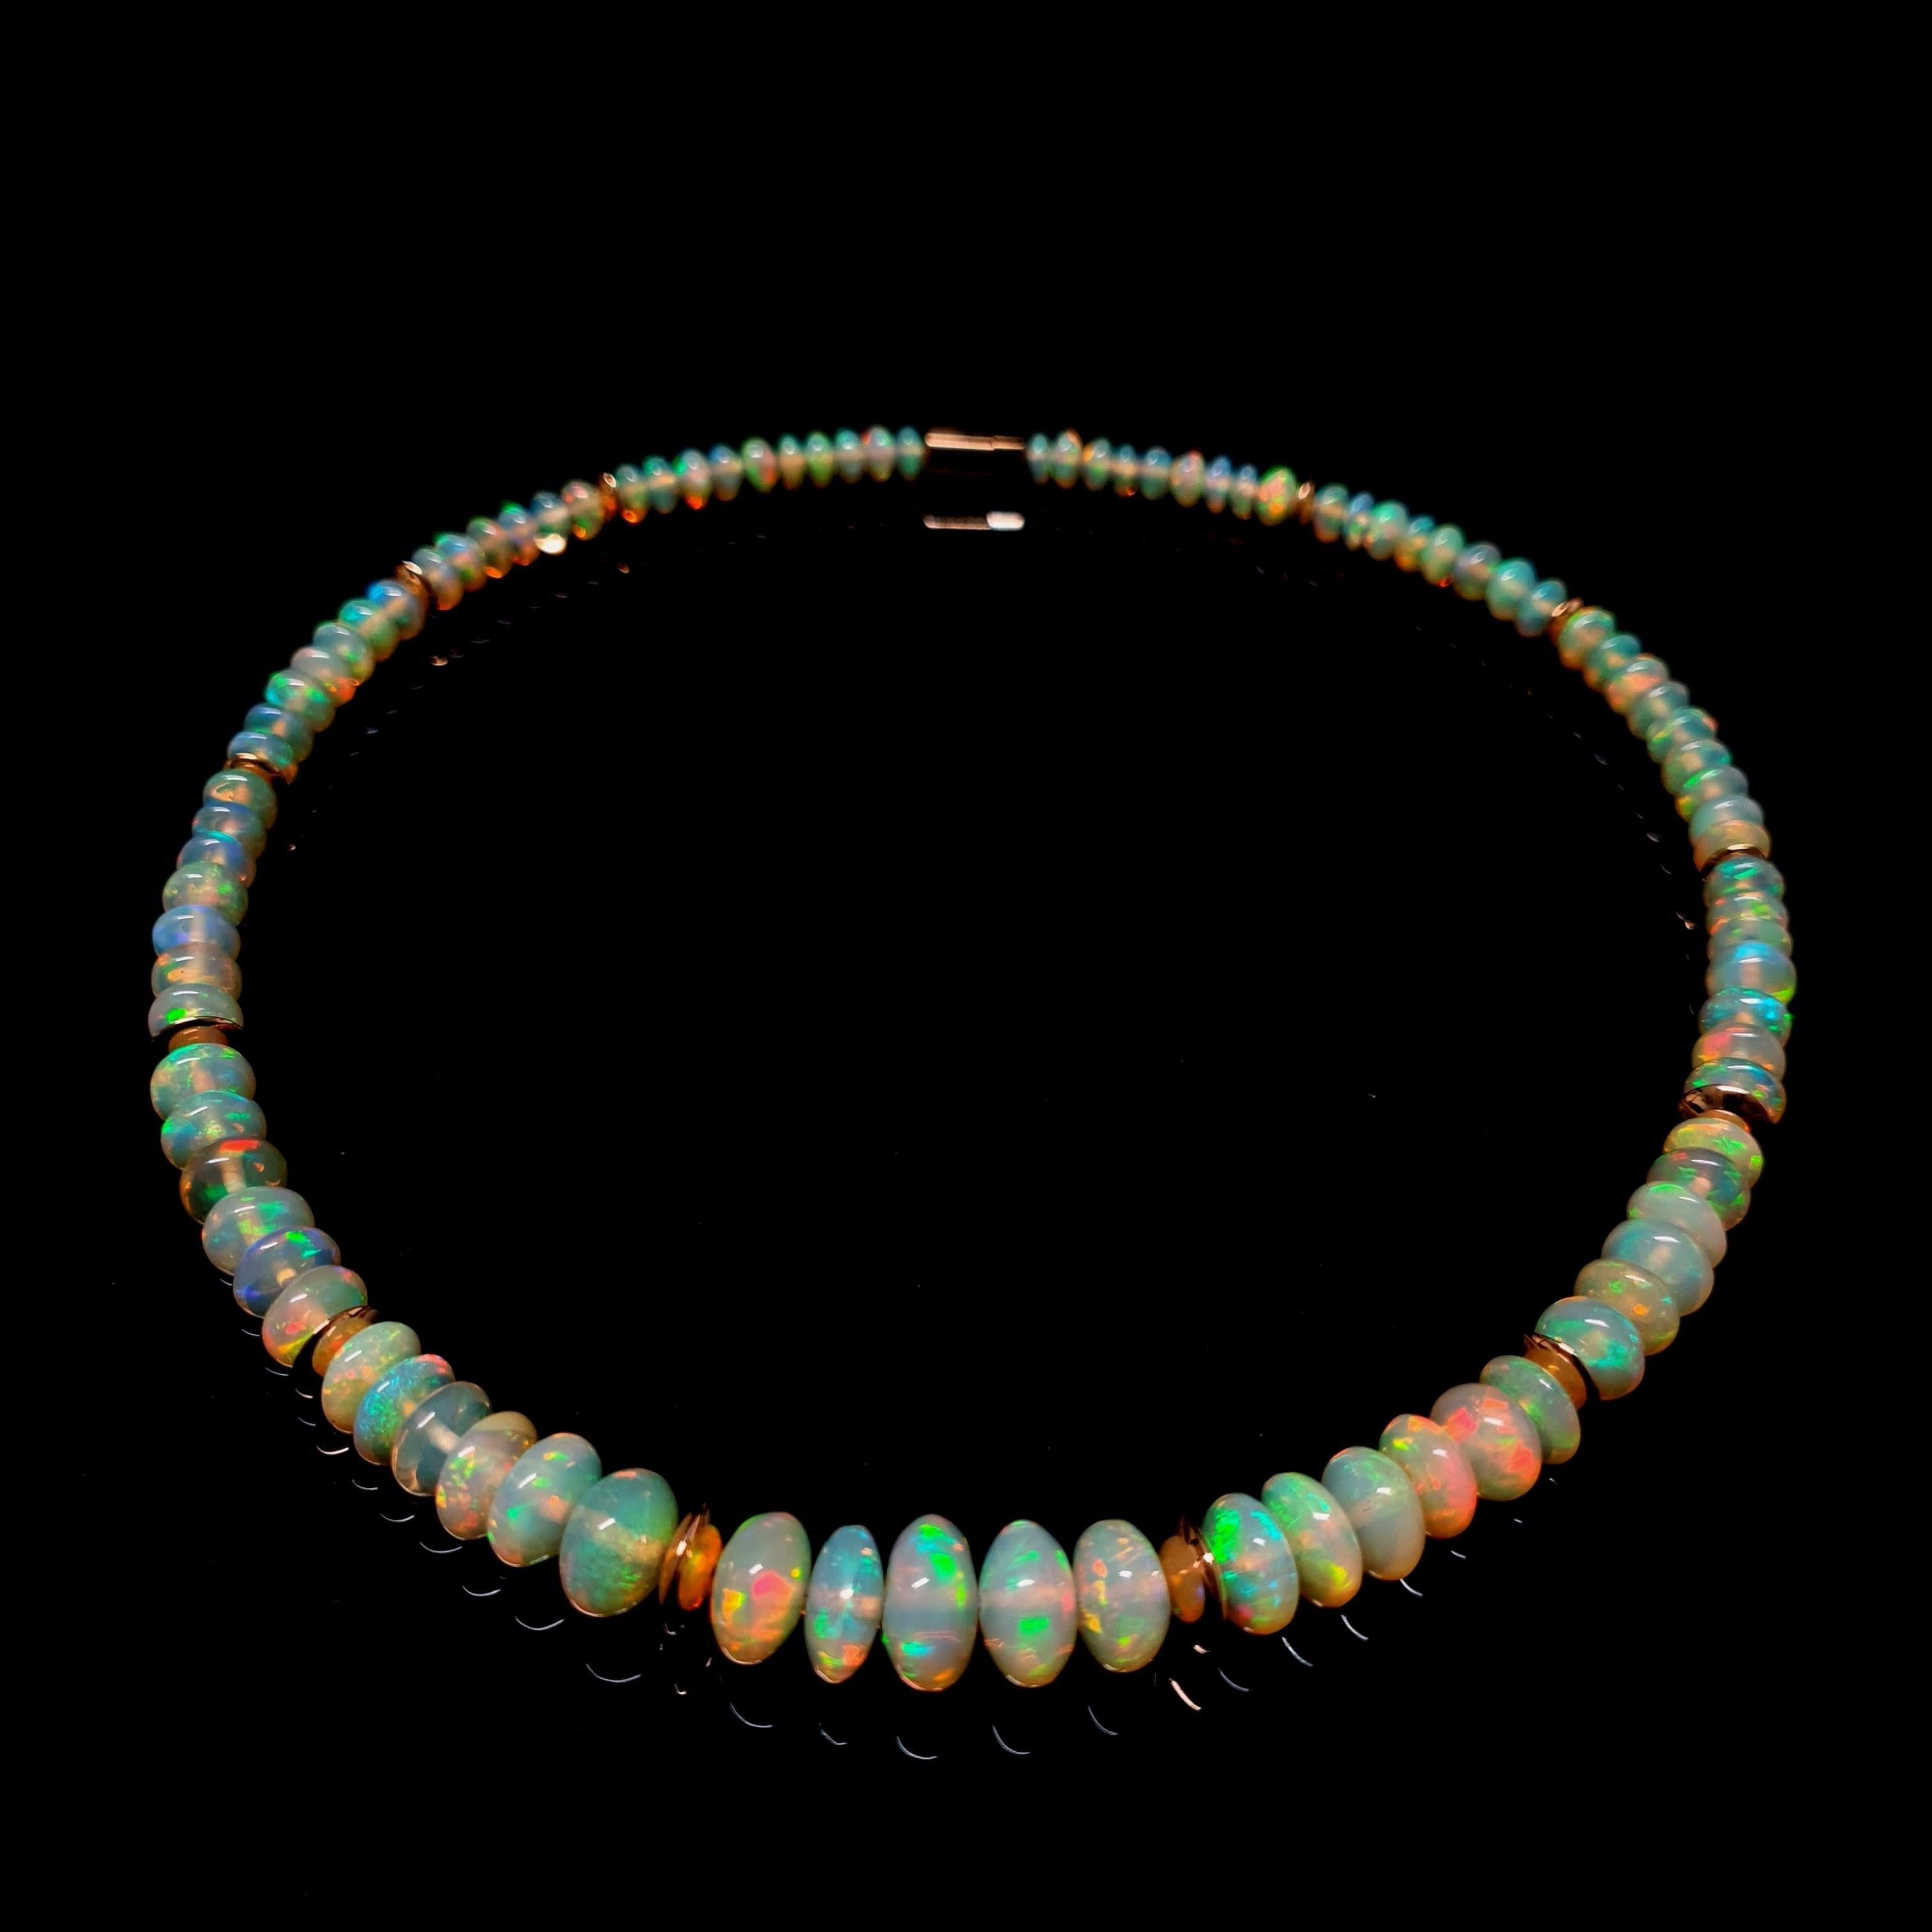 Crispy Sparkling Opal Rondel Beaded Necklace with 18 Carat Rose Gold, Greenish For Sale 4